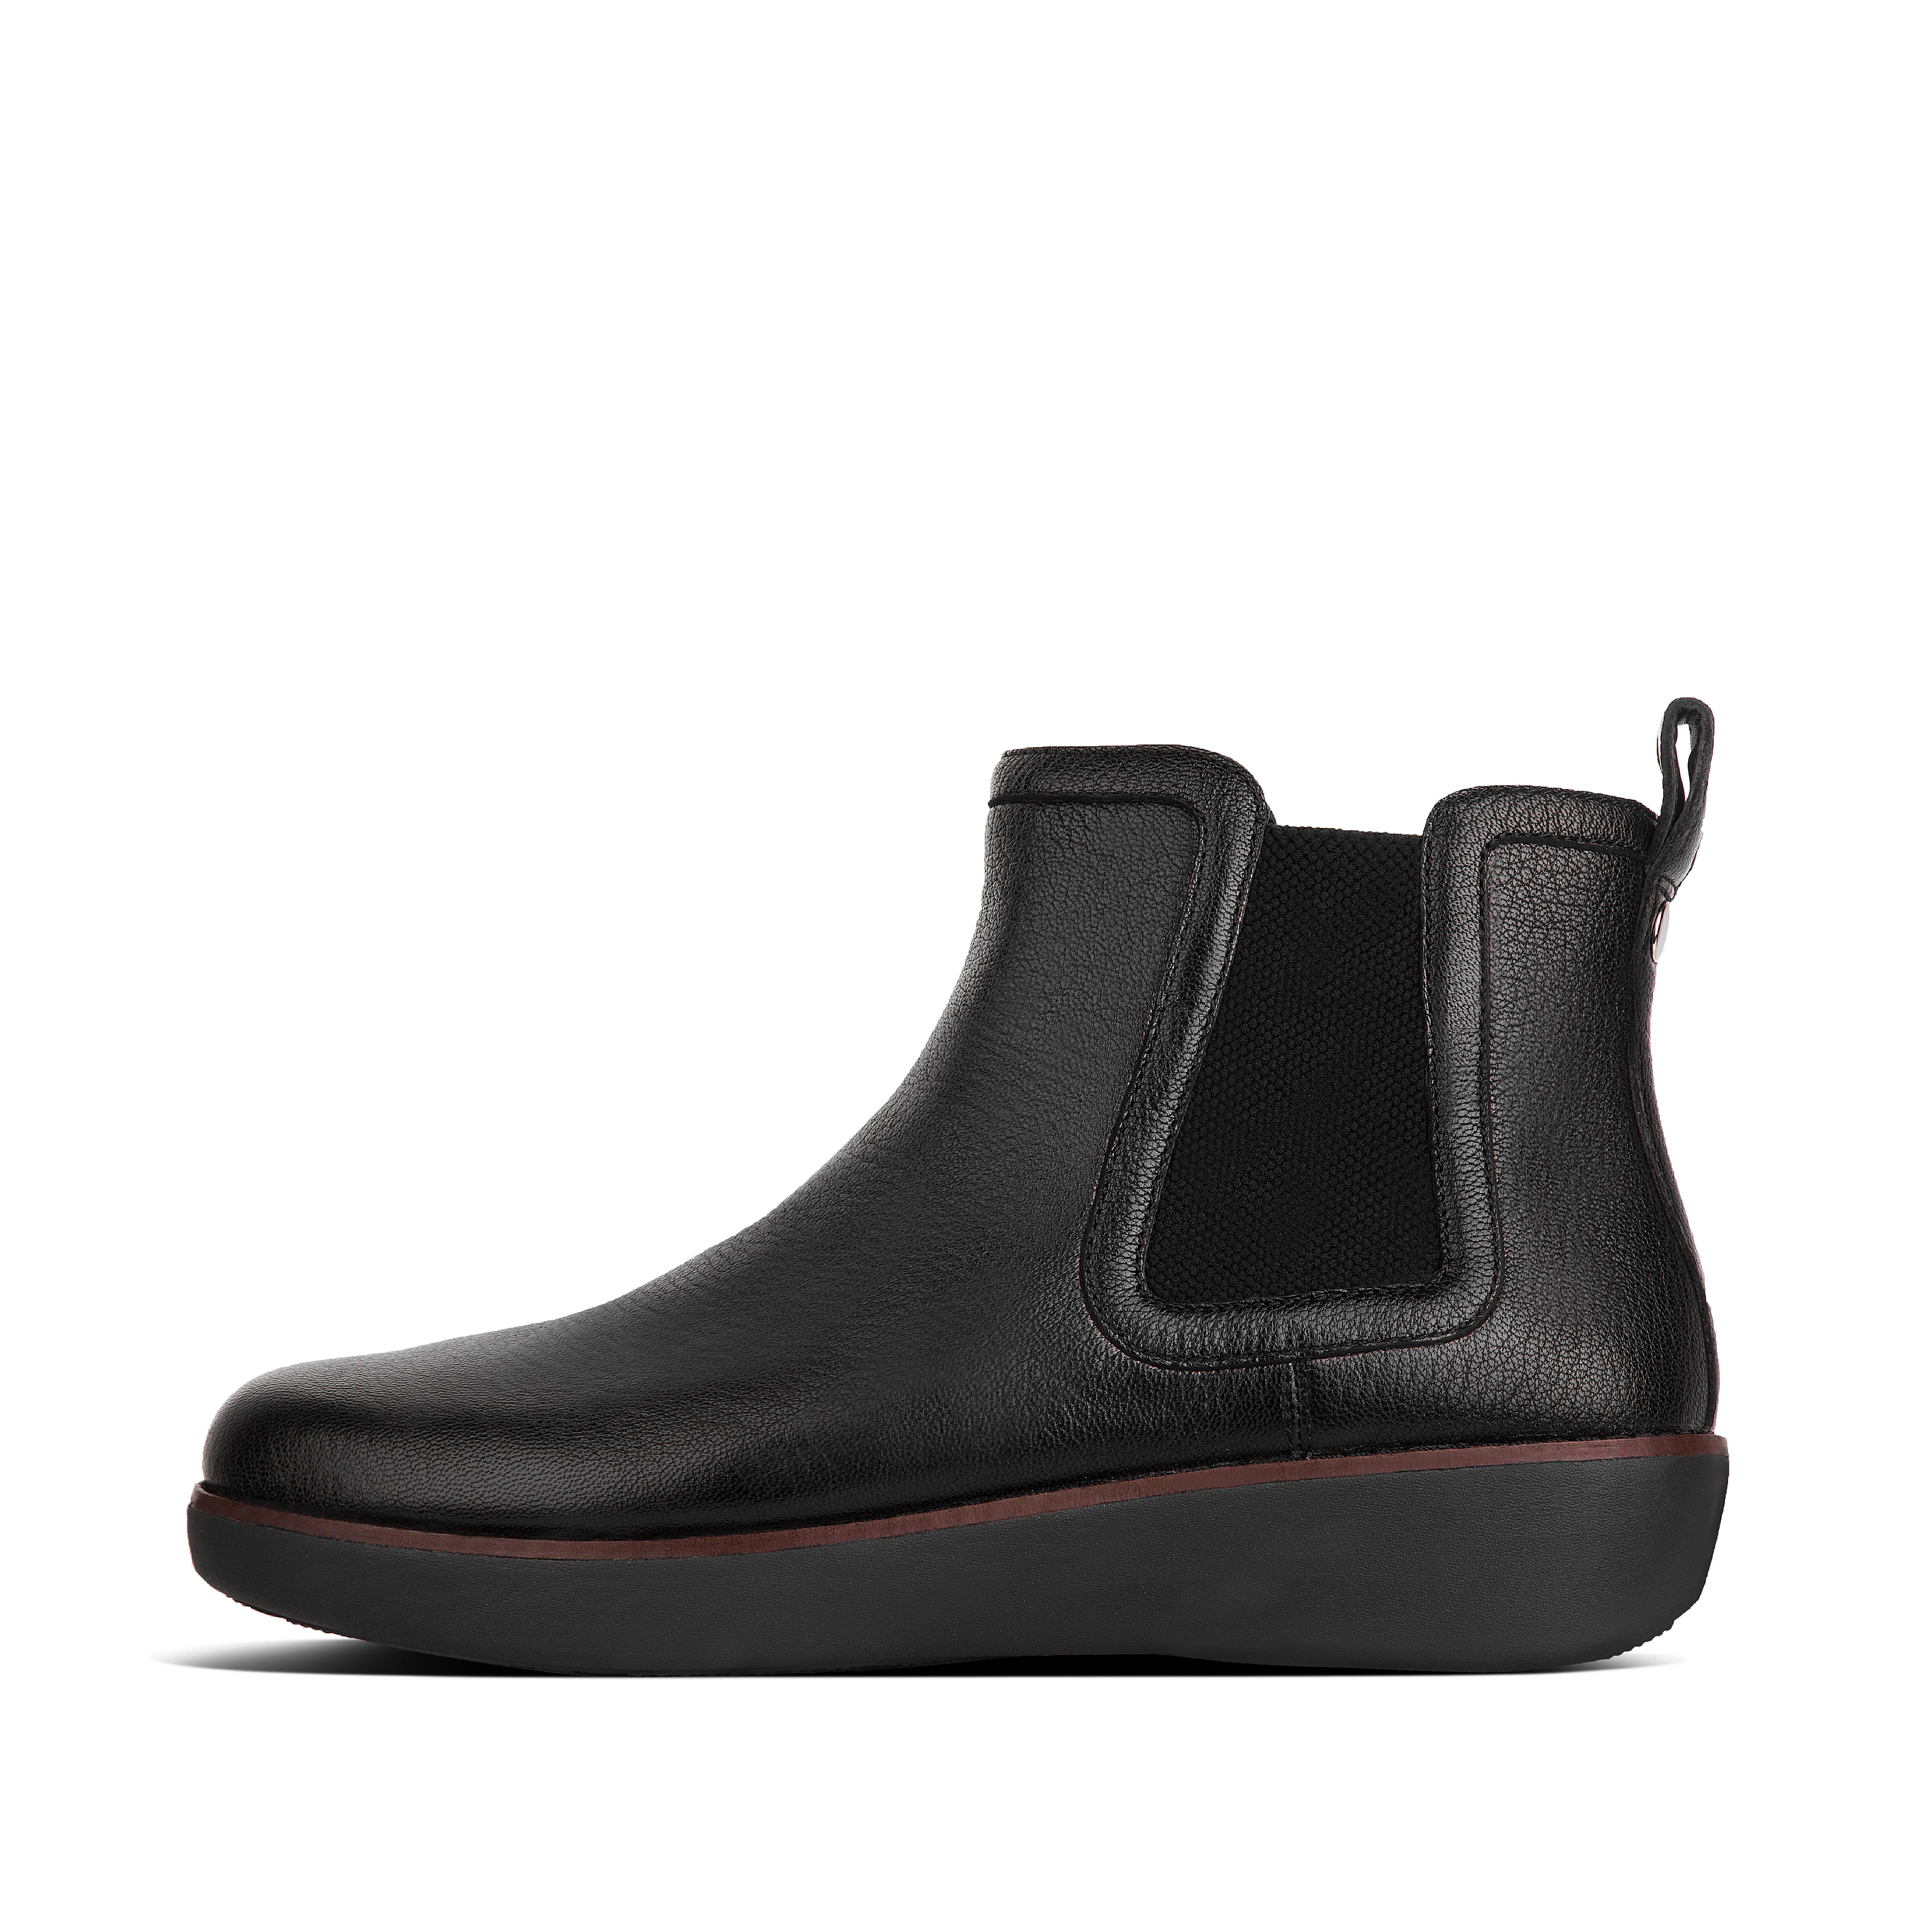 A classic Chelsea boot is a fashion lifesaver and these are a supercovetable example. Here in rich tumbled leather, our Chai boots boast an ultra-flattering cut, thick stretchy side panels and Supercom FF midsoles for amazing all-day comfort. Perfect with practically every winter outfit, try them with woolly tights and a maxi dress or skinnies, with oversized knits layered on top.